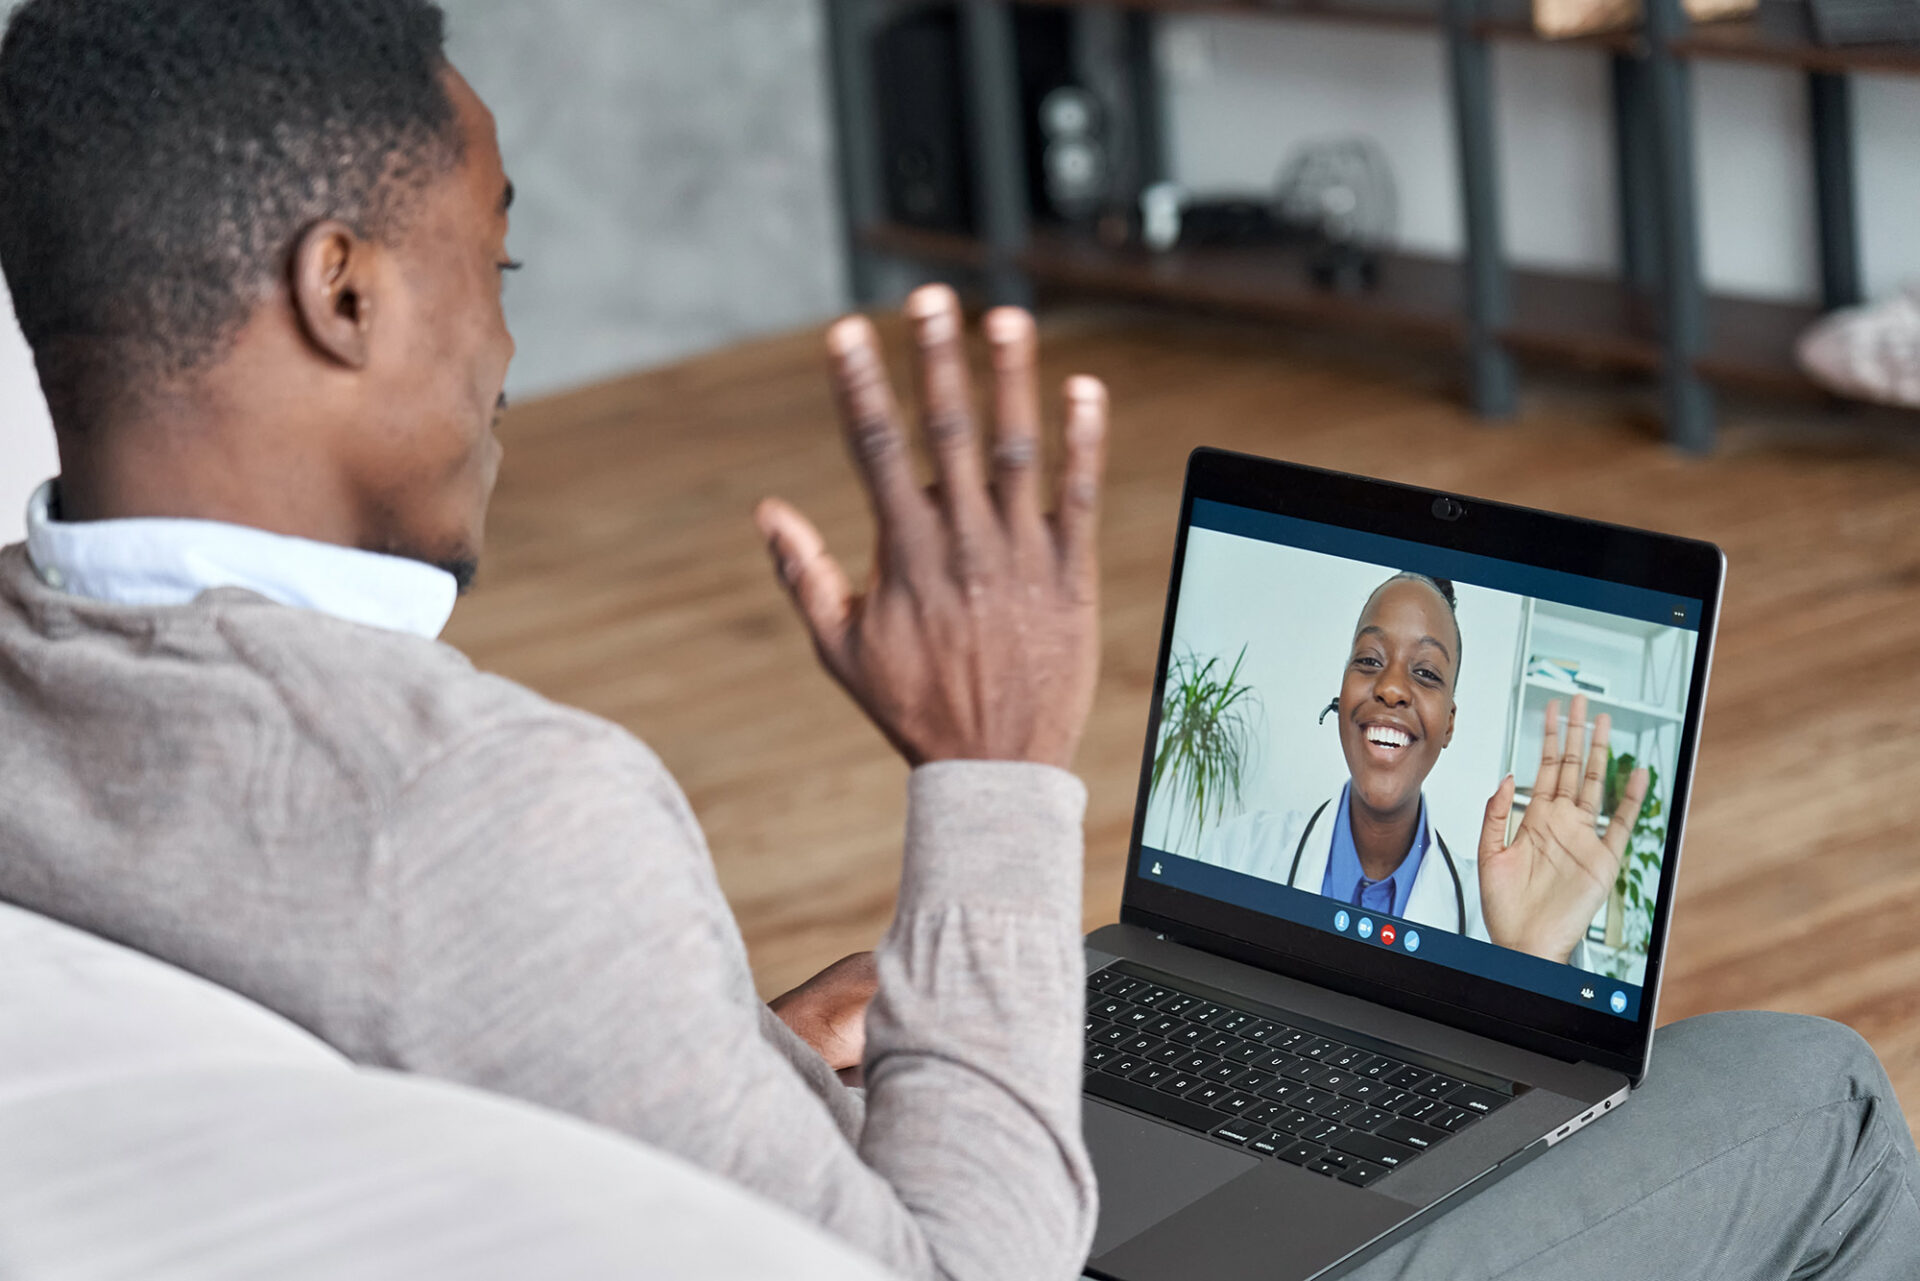 Guy waving at doctor on a computer